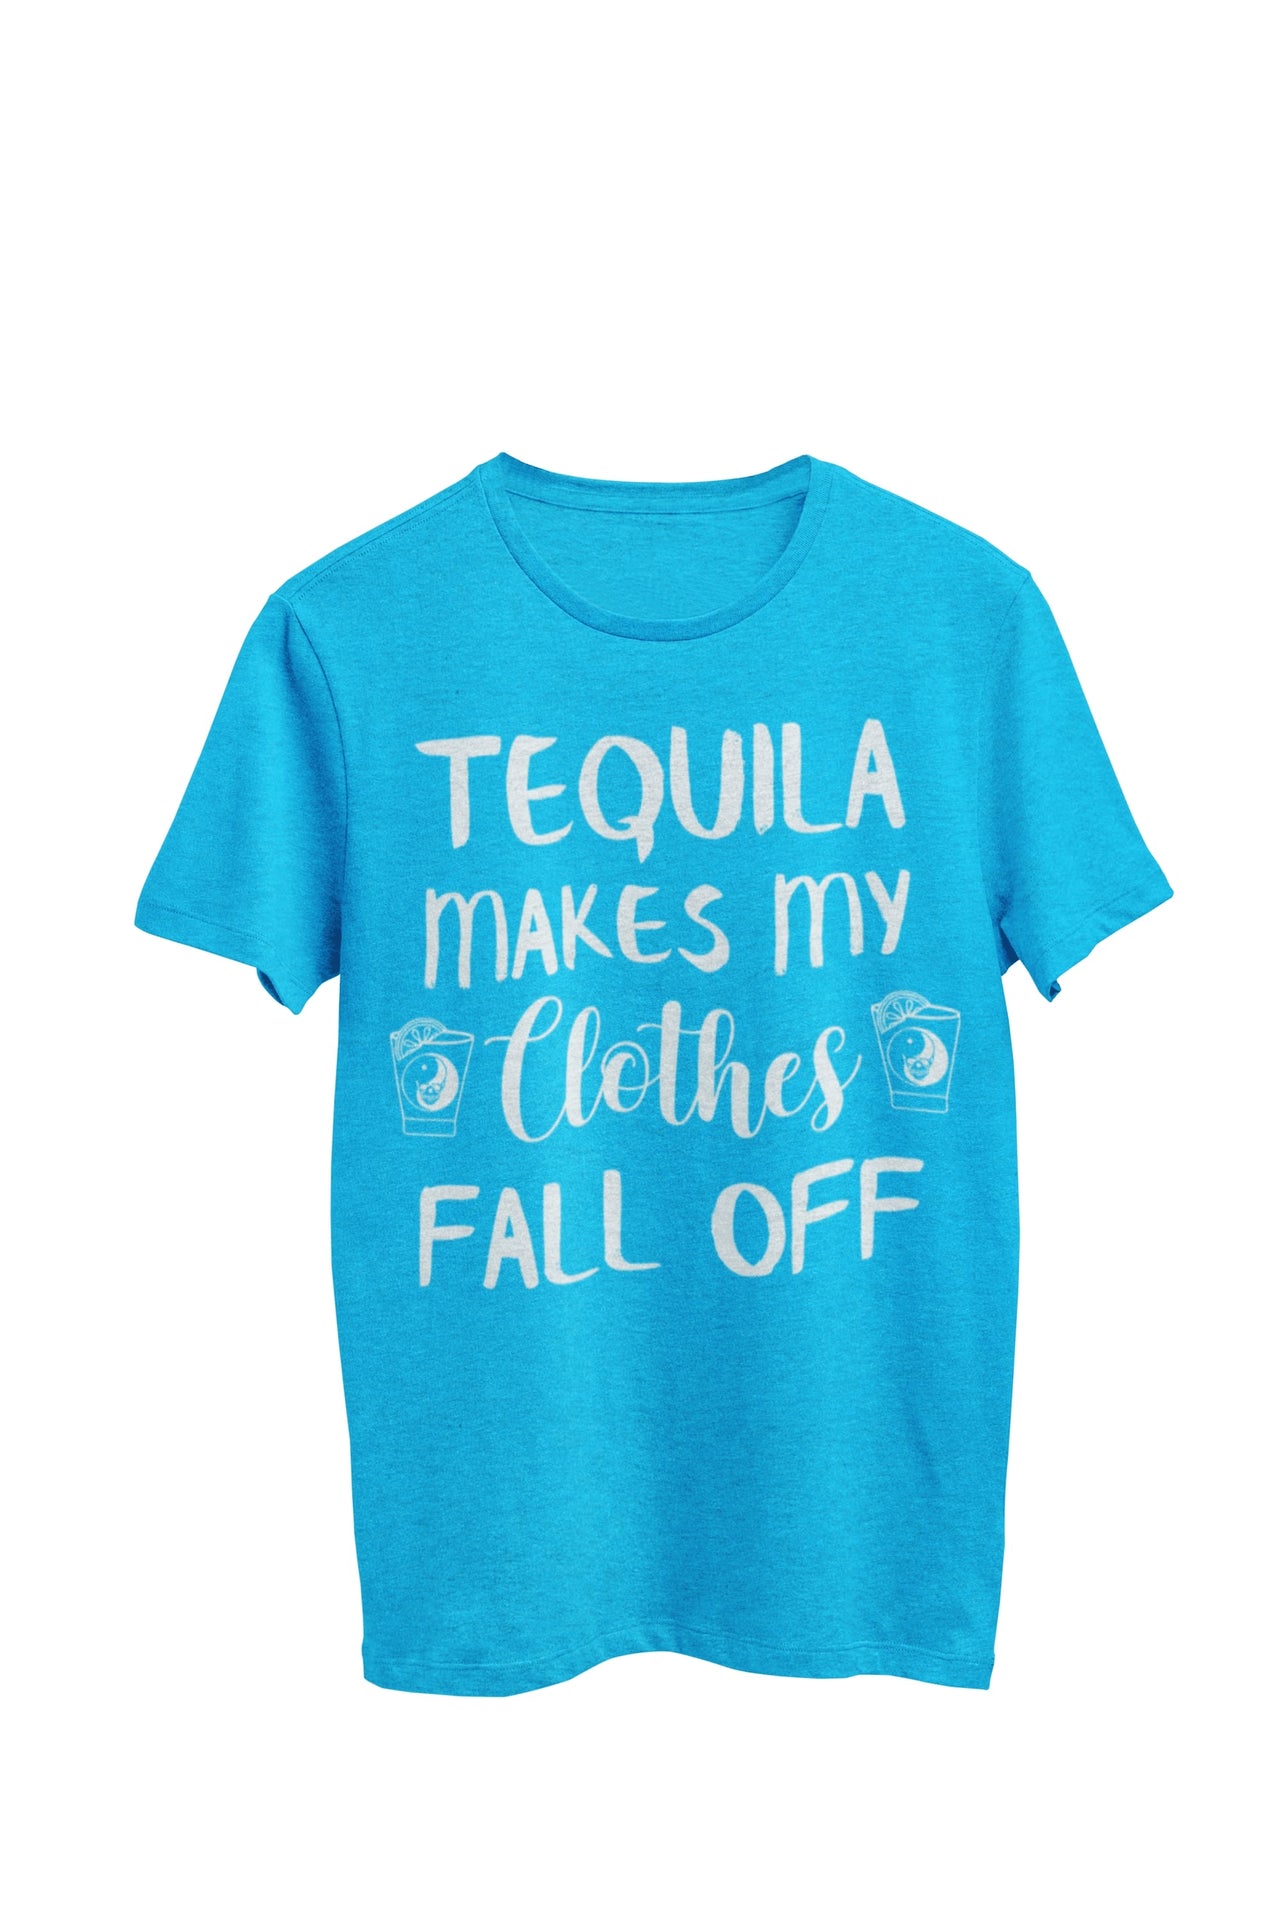 Heather Turquoise Unisex T-shirt featuring the text 'Tequila makes my clothes fall off,' accompanied by an image of a shot glass with a yin yang symbol on each side of the words. Designed by WooHoo Apparel.